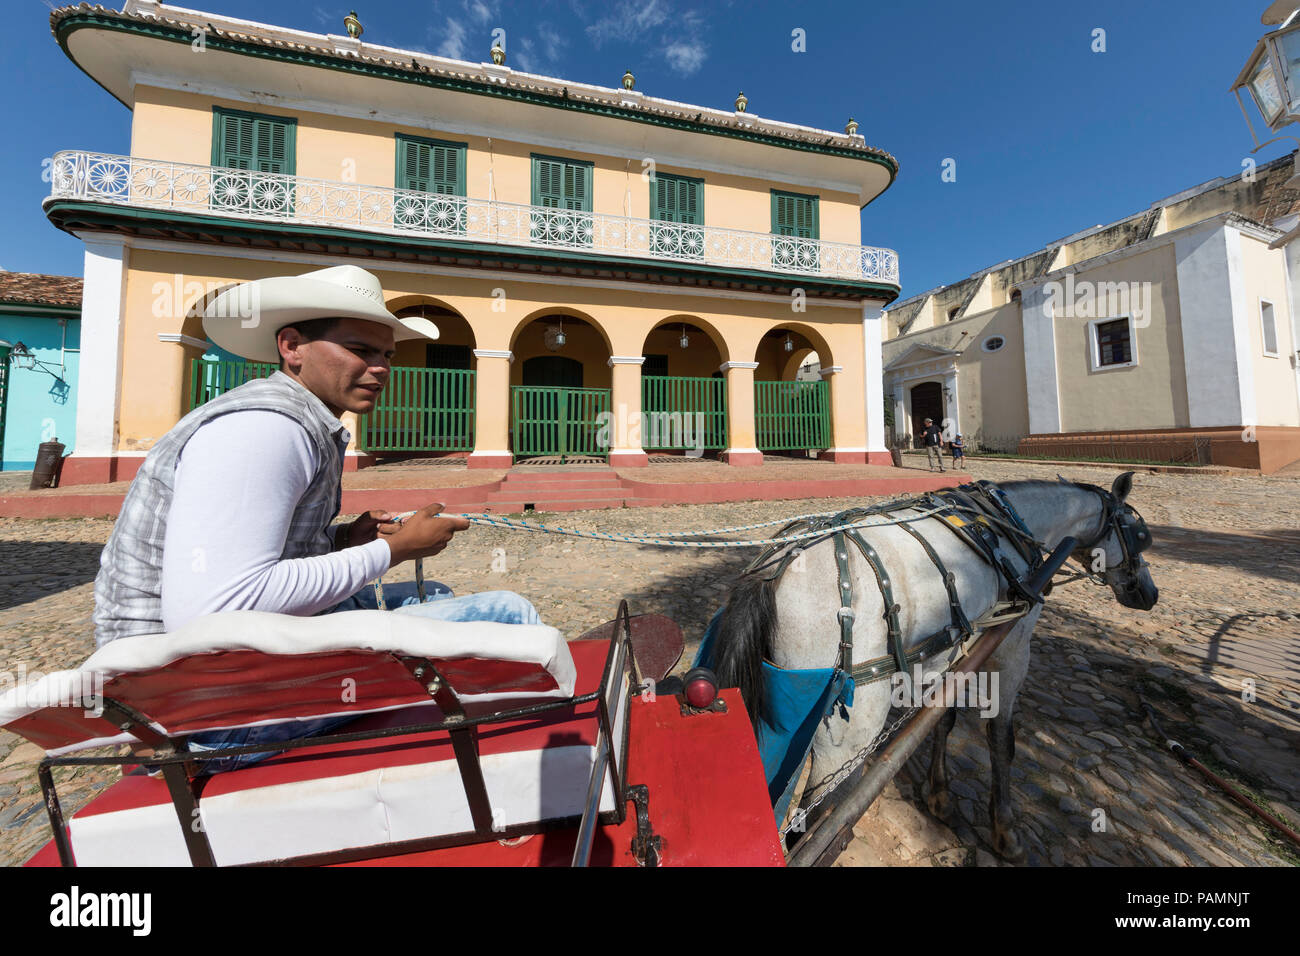 A horse-drawn cart known locally as a coche in Plaza Mayor, in the UNESCO World Heritage town of Trinidad, Cuba. Stock Photo